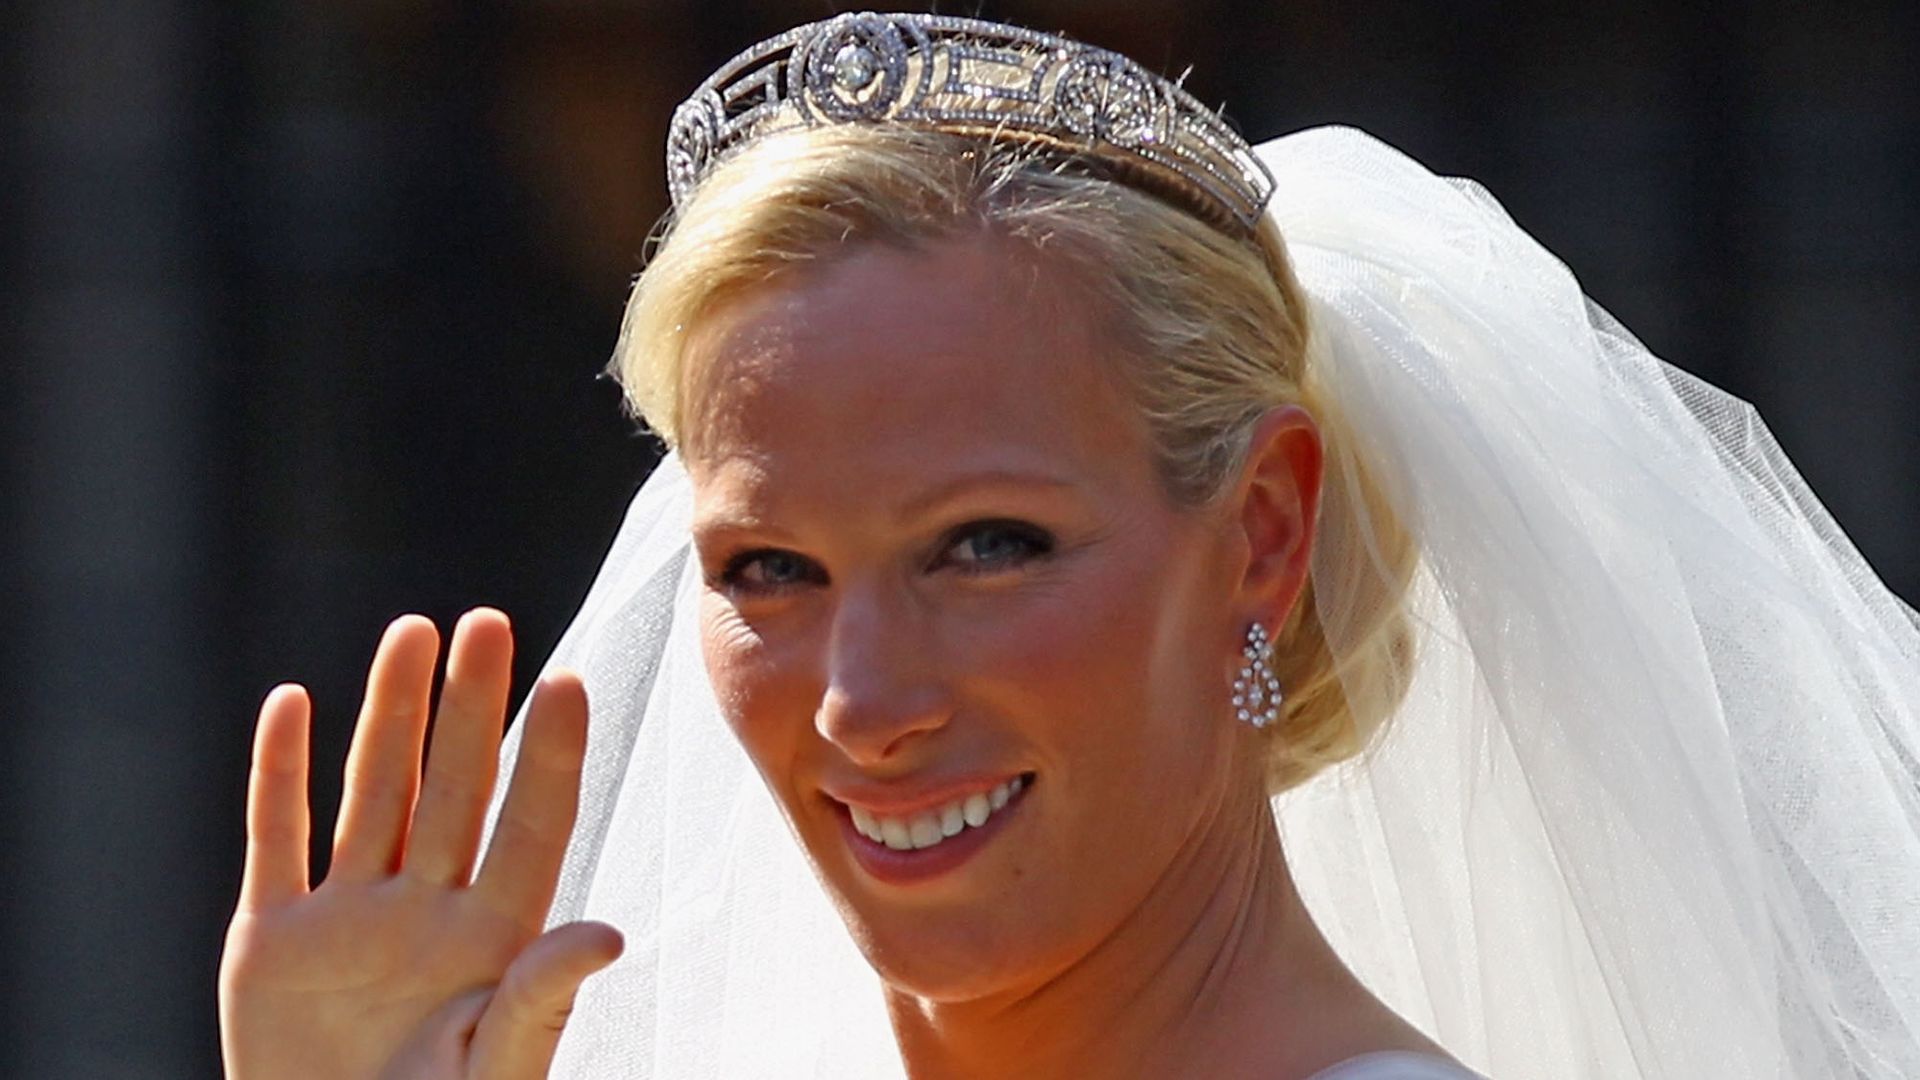 Zara Phillips waving to crowds at her royal wedding with Mike Tindall 